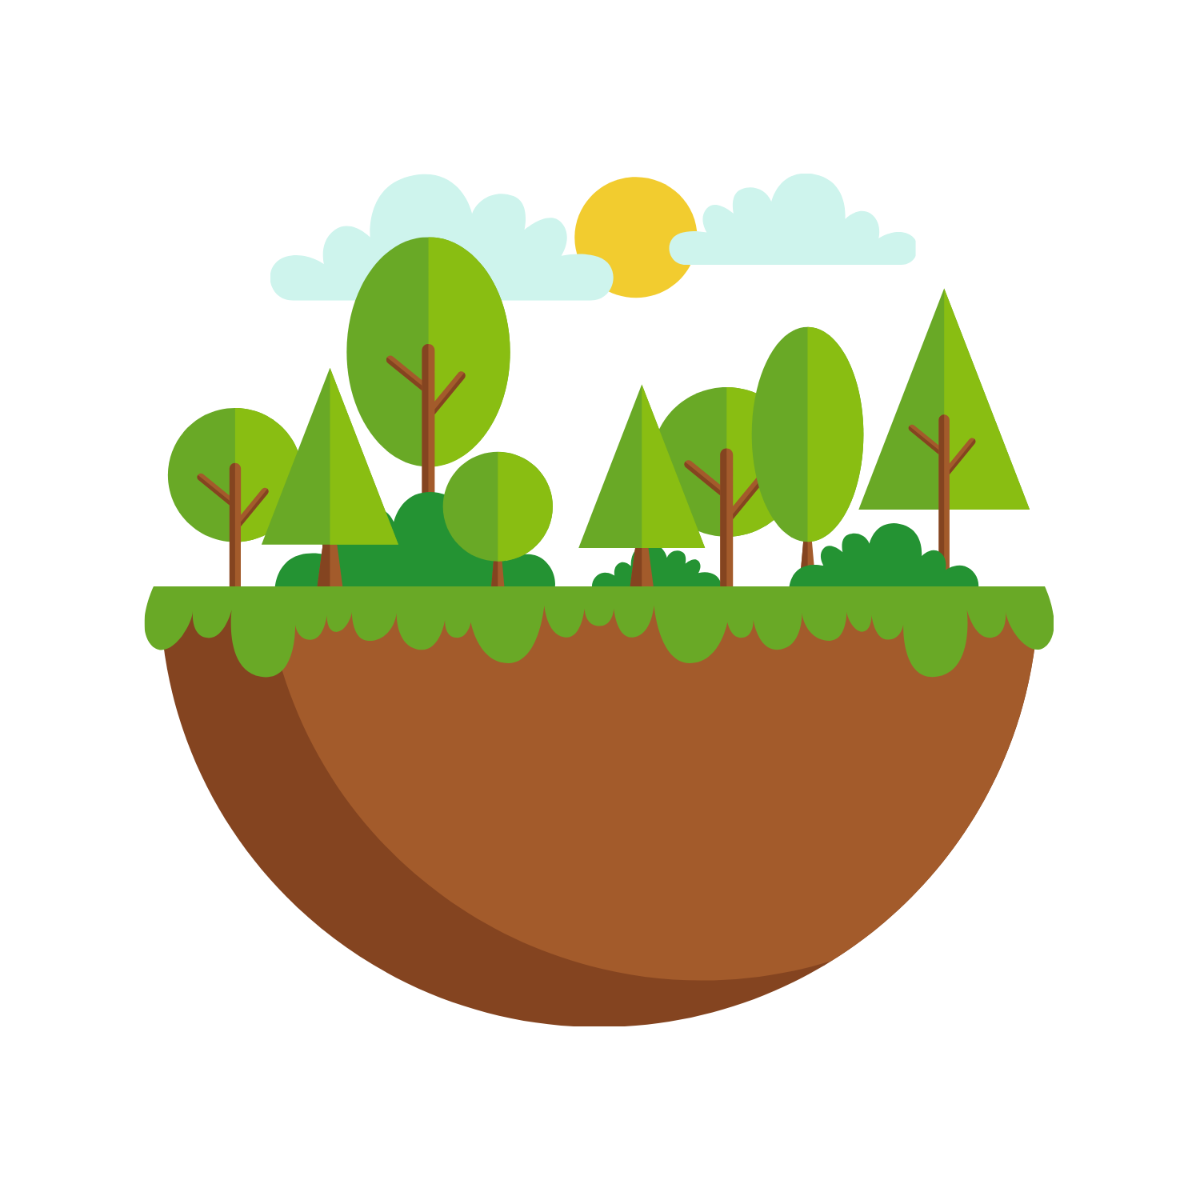 Happy World Environment Day Illustration Template